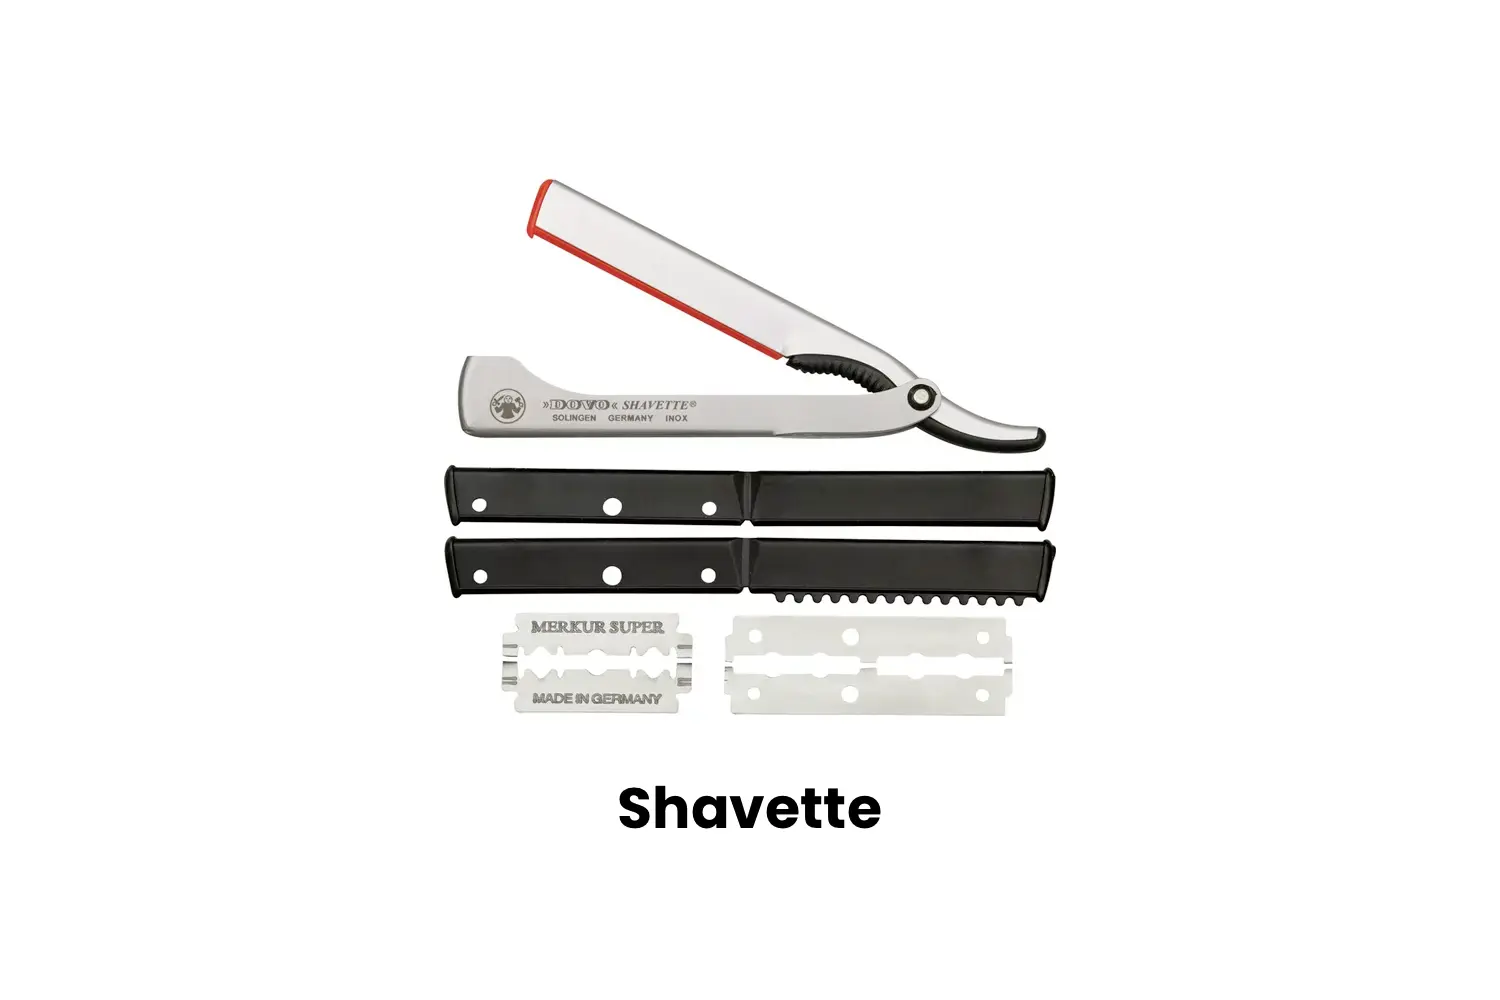 packaging of a dovo shavette